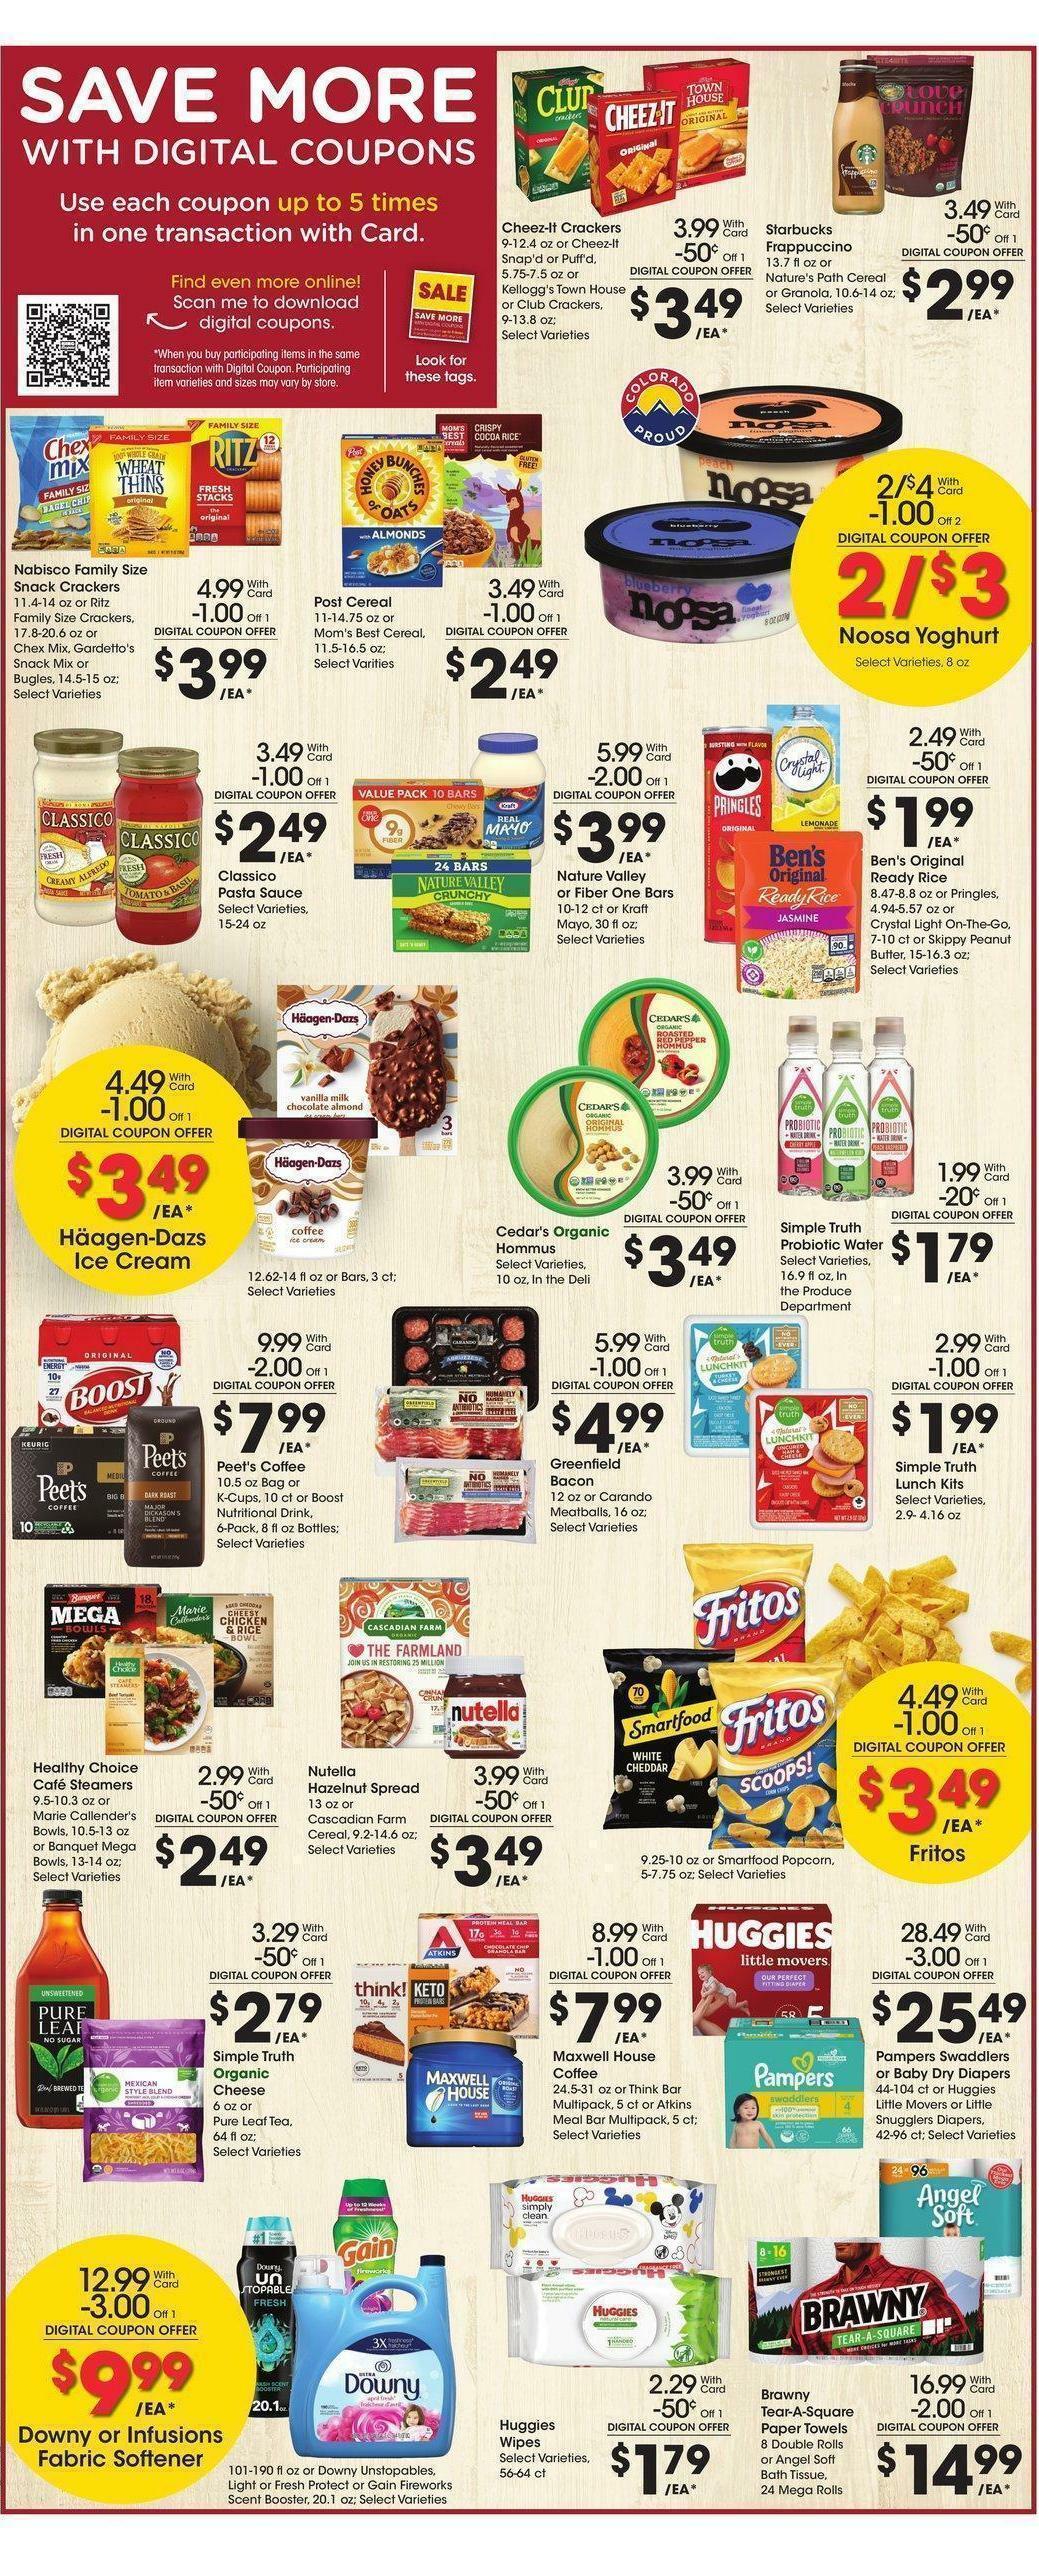 King Soopers Weekly Ad from May 31